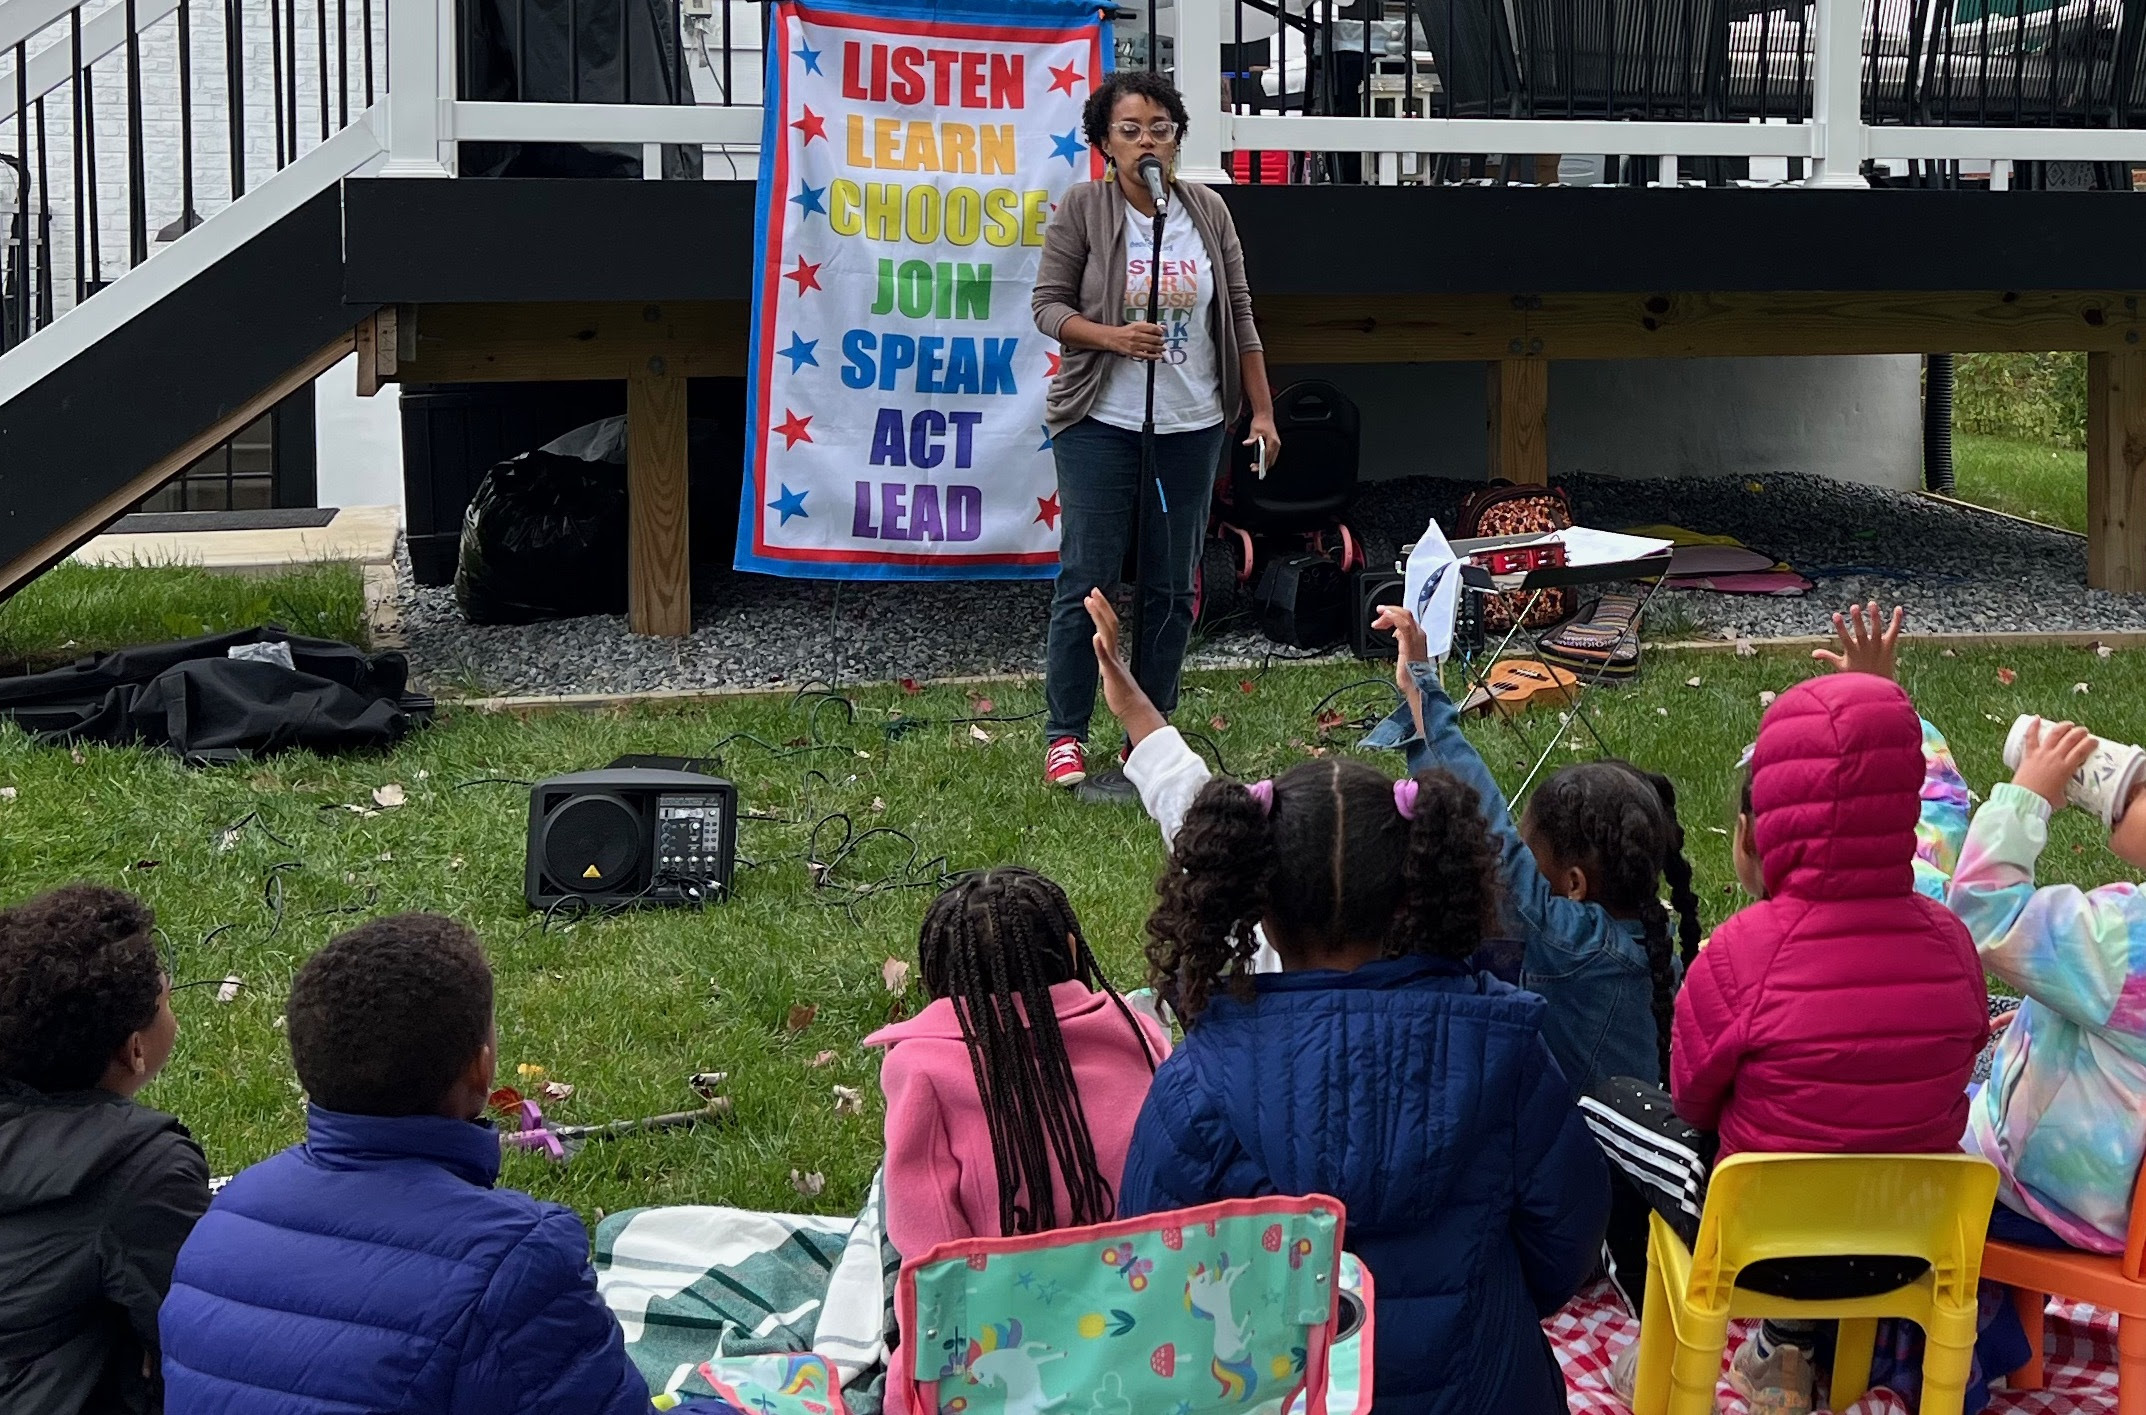 Munit Mesfin singing outside in front of a group of children, with a poster behind her that reads: "Listen Learn Choose Join Speak Act Lead"